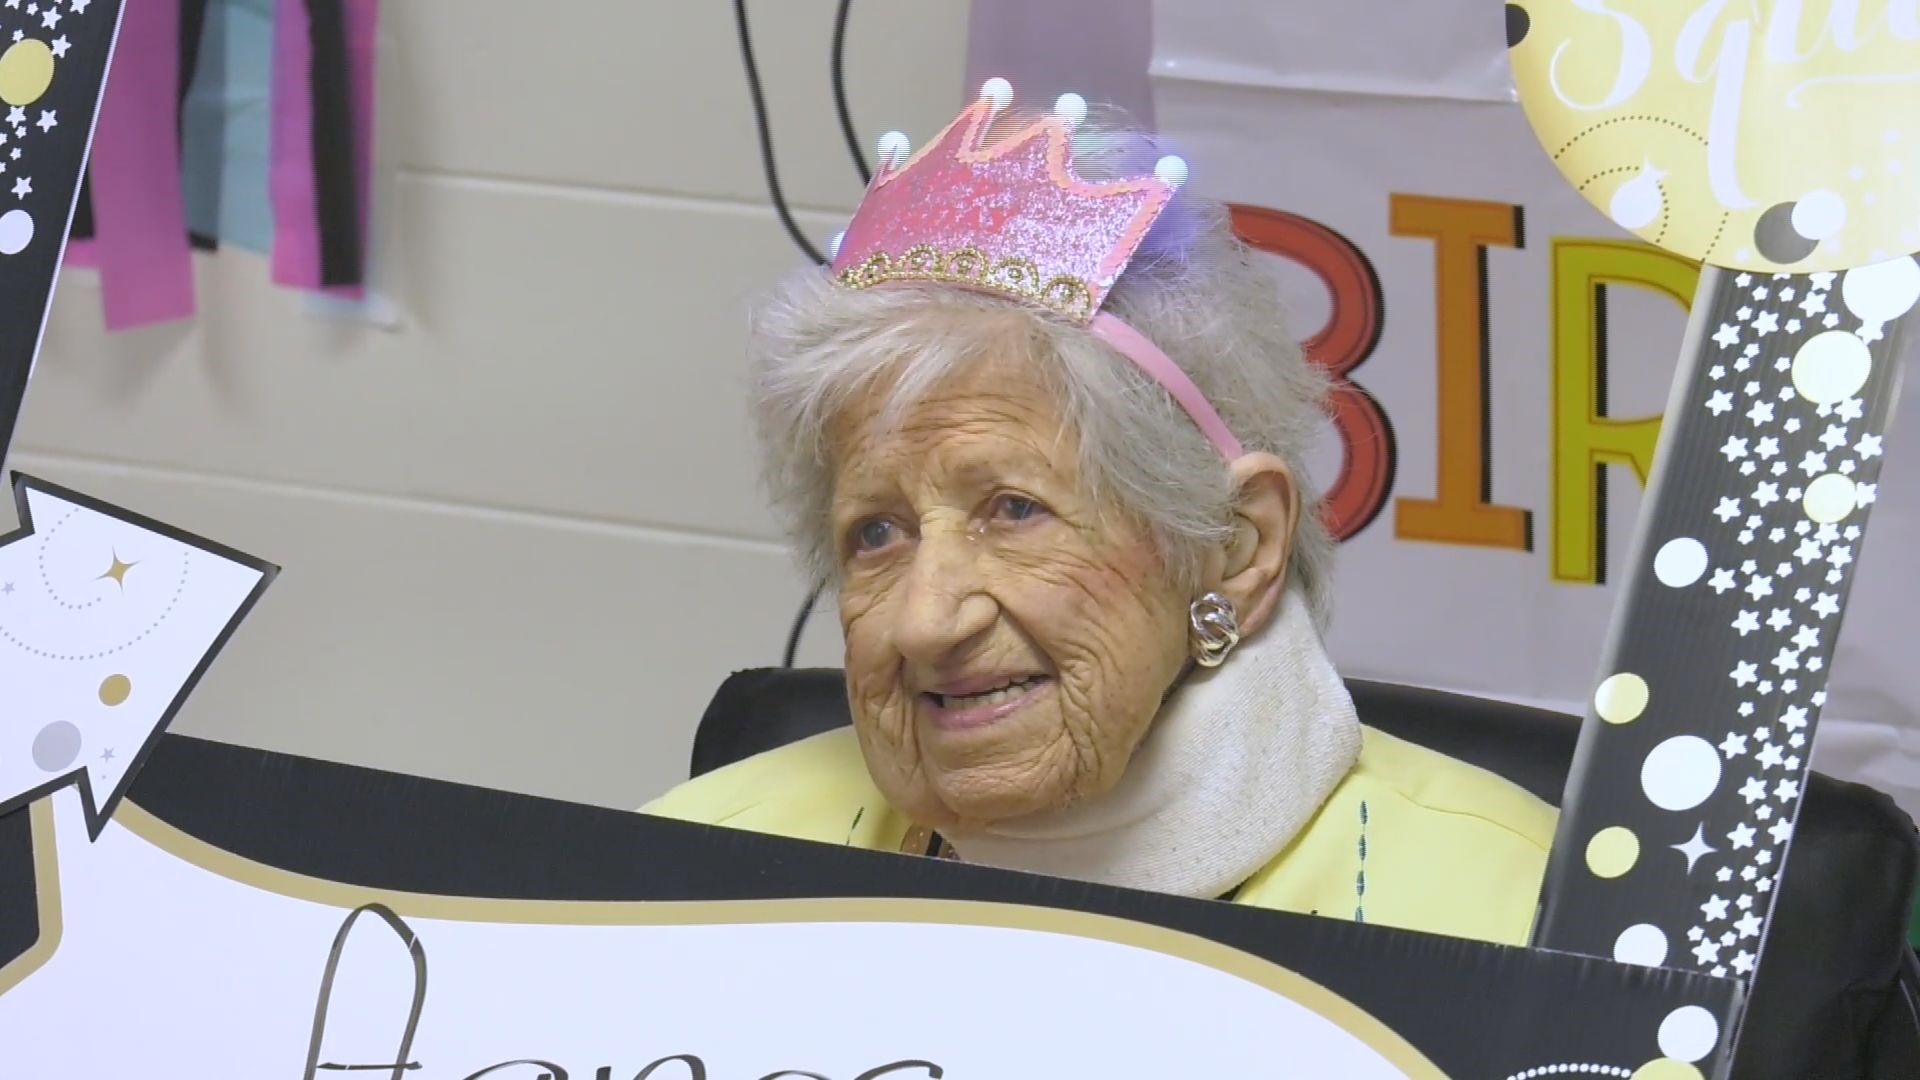 It's a very special day for Agnes Miklus.

She was born 100 years ago on June 19, 1919 -- today is her birthday! Miklus celebrated with her closest friends at the Bloomingdale Adult Day Center in Brandon, Florida.  

"God's been very good to me and I'm very grateful to have such friends -- and real friends!" Miklus said. "Thank you all very, very much. This is wonderful."